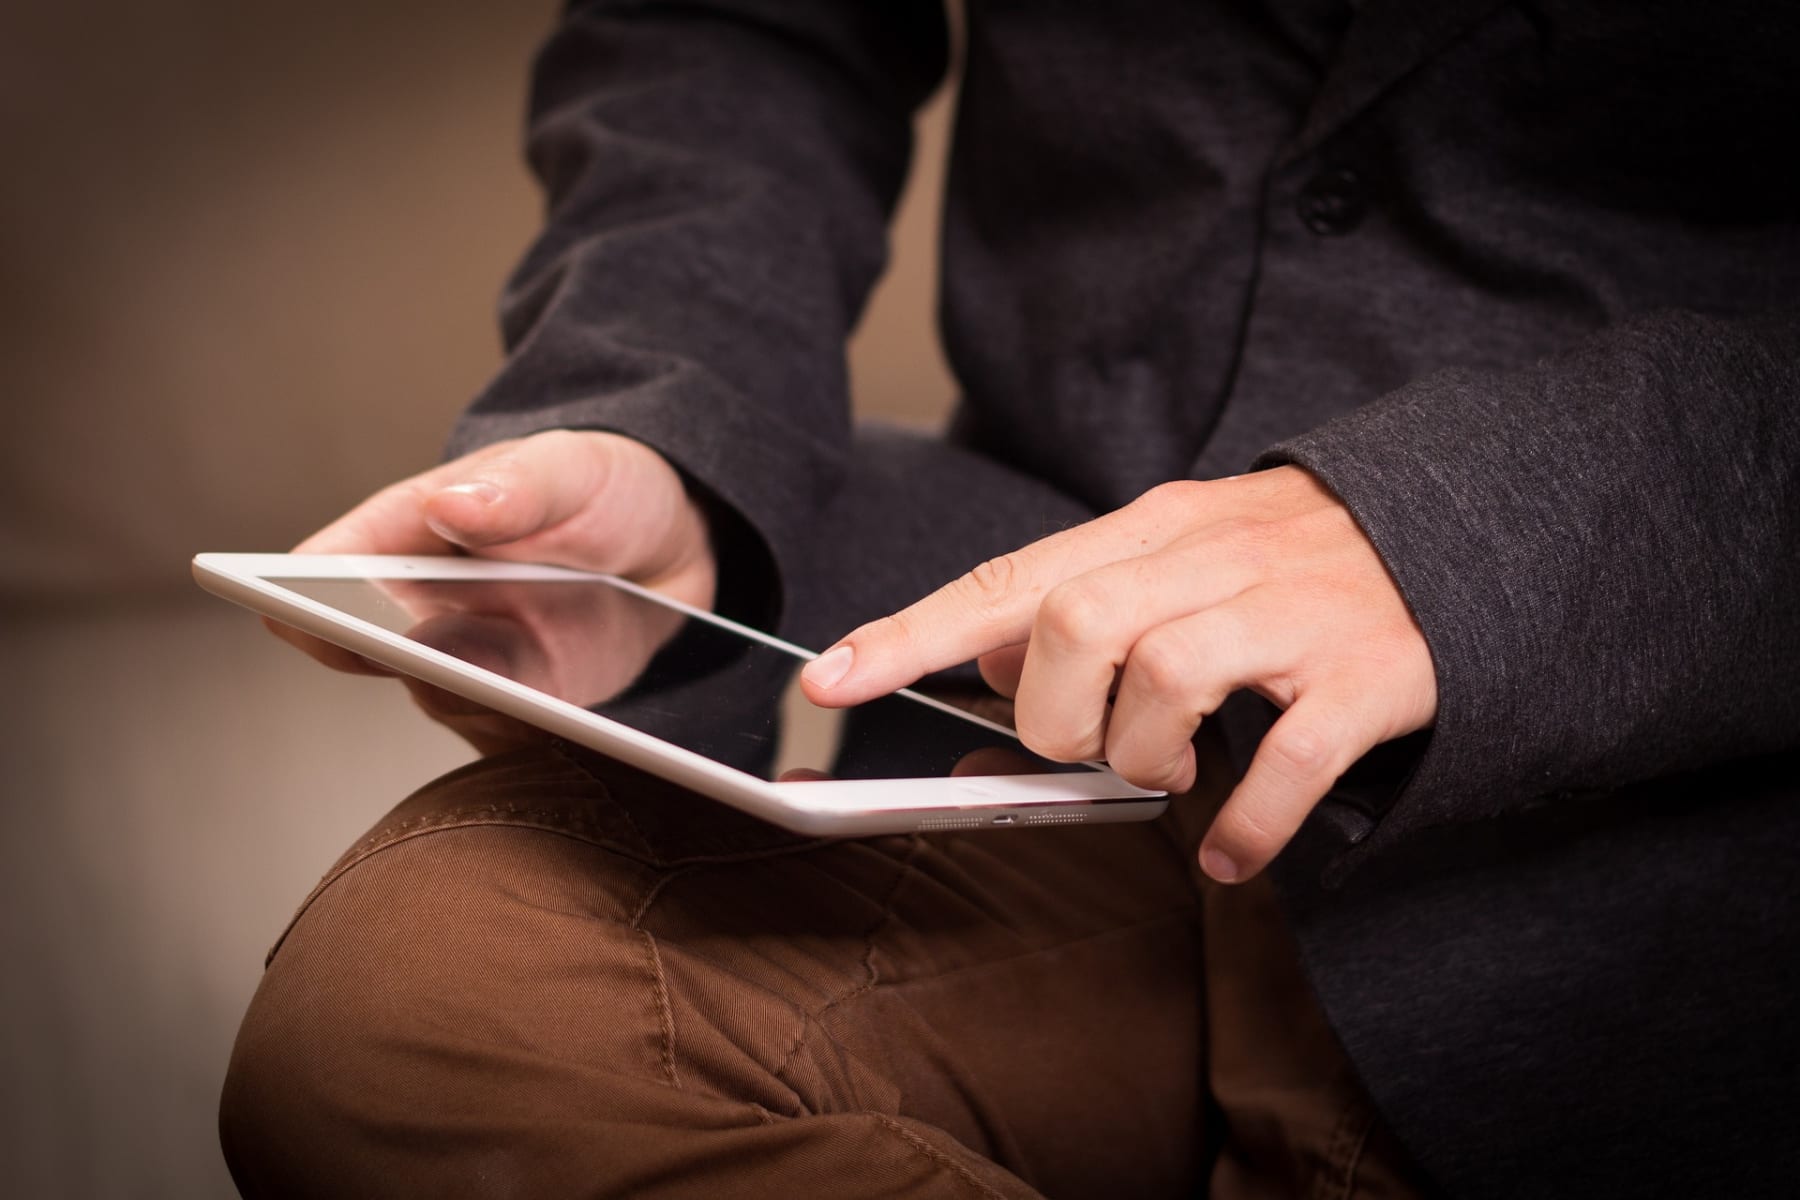 A person using an iPad with one finger on the screen.